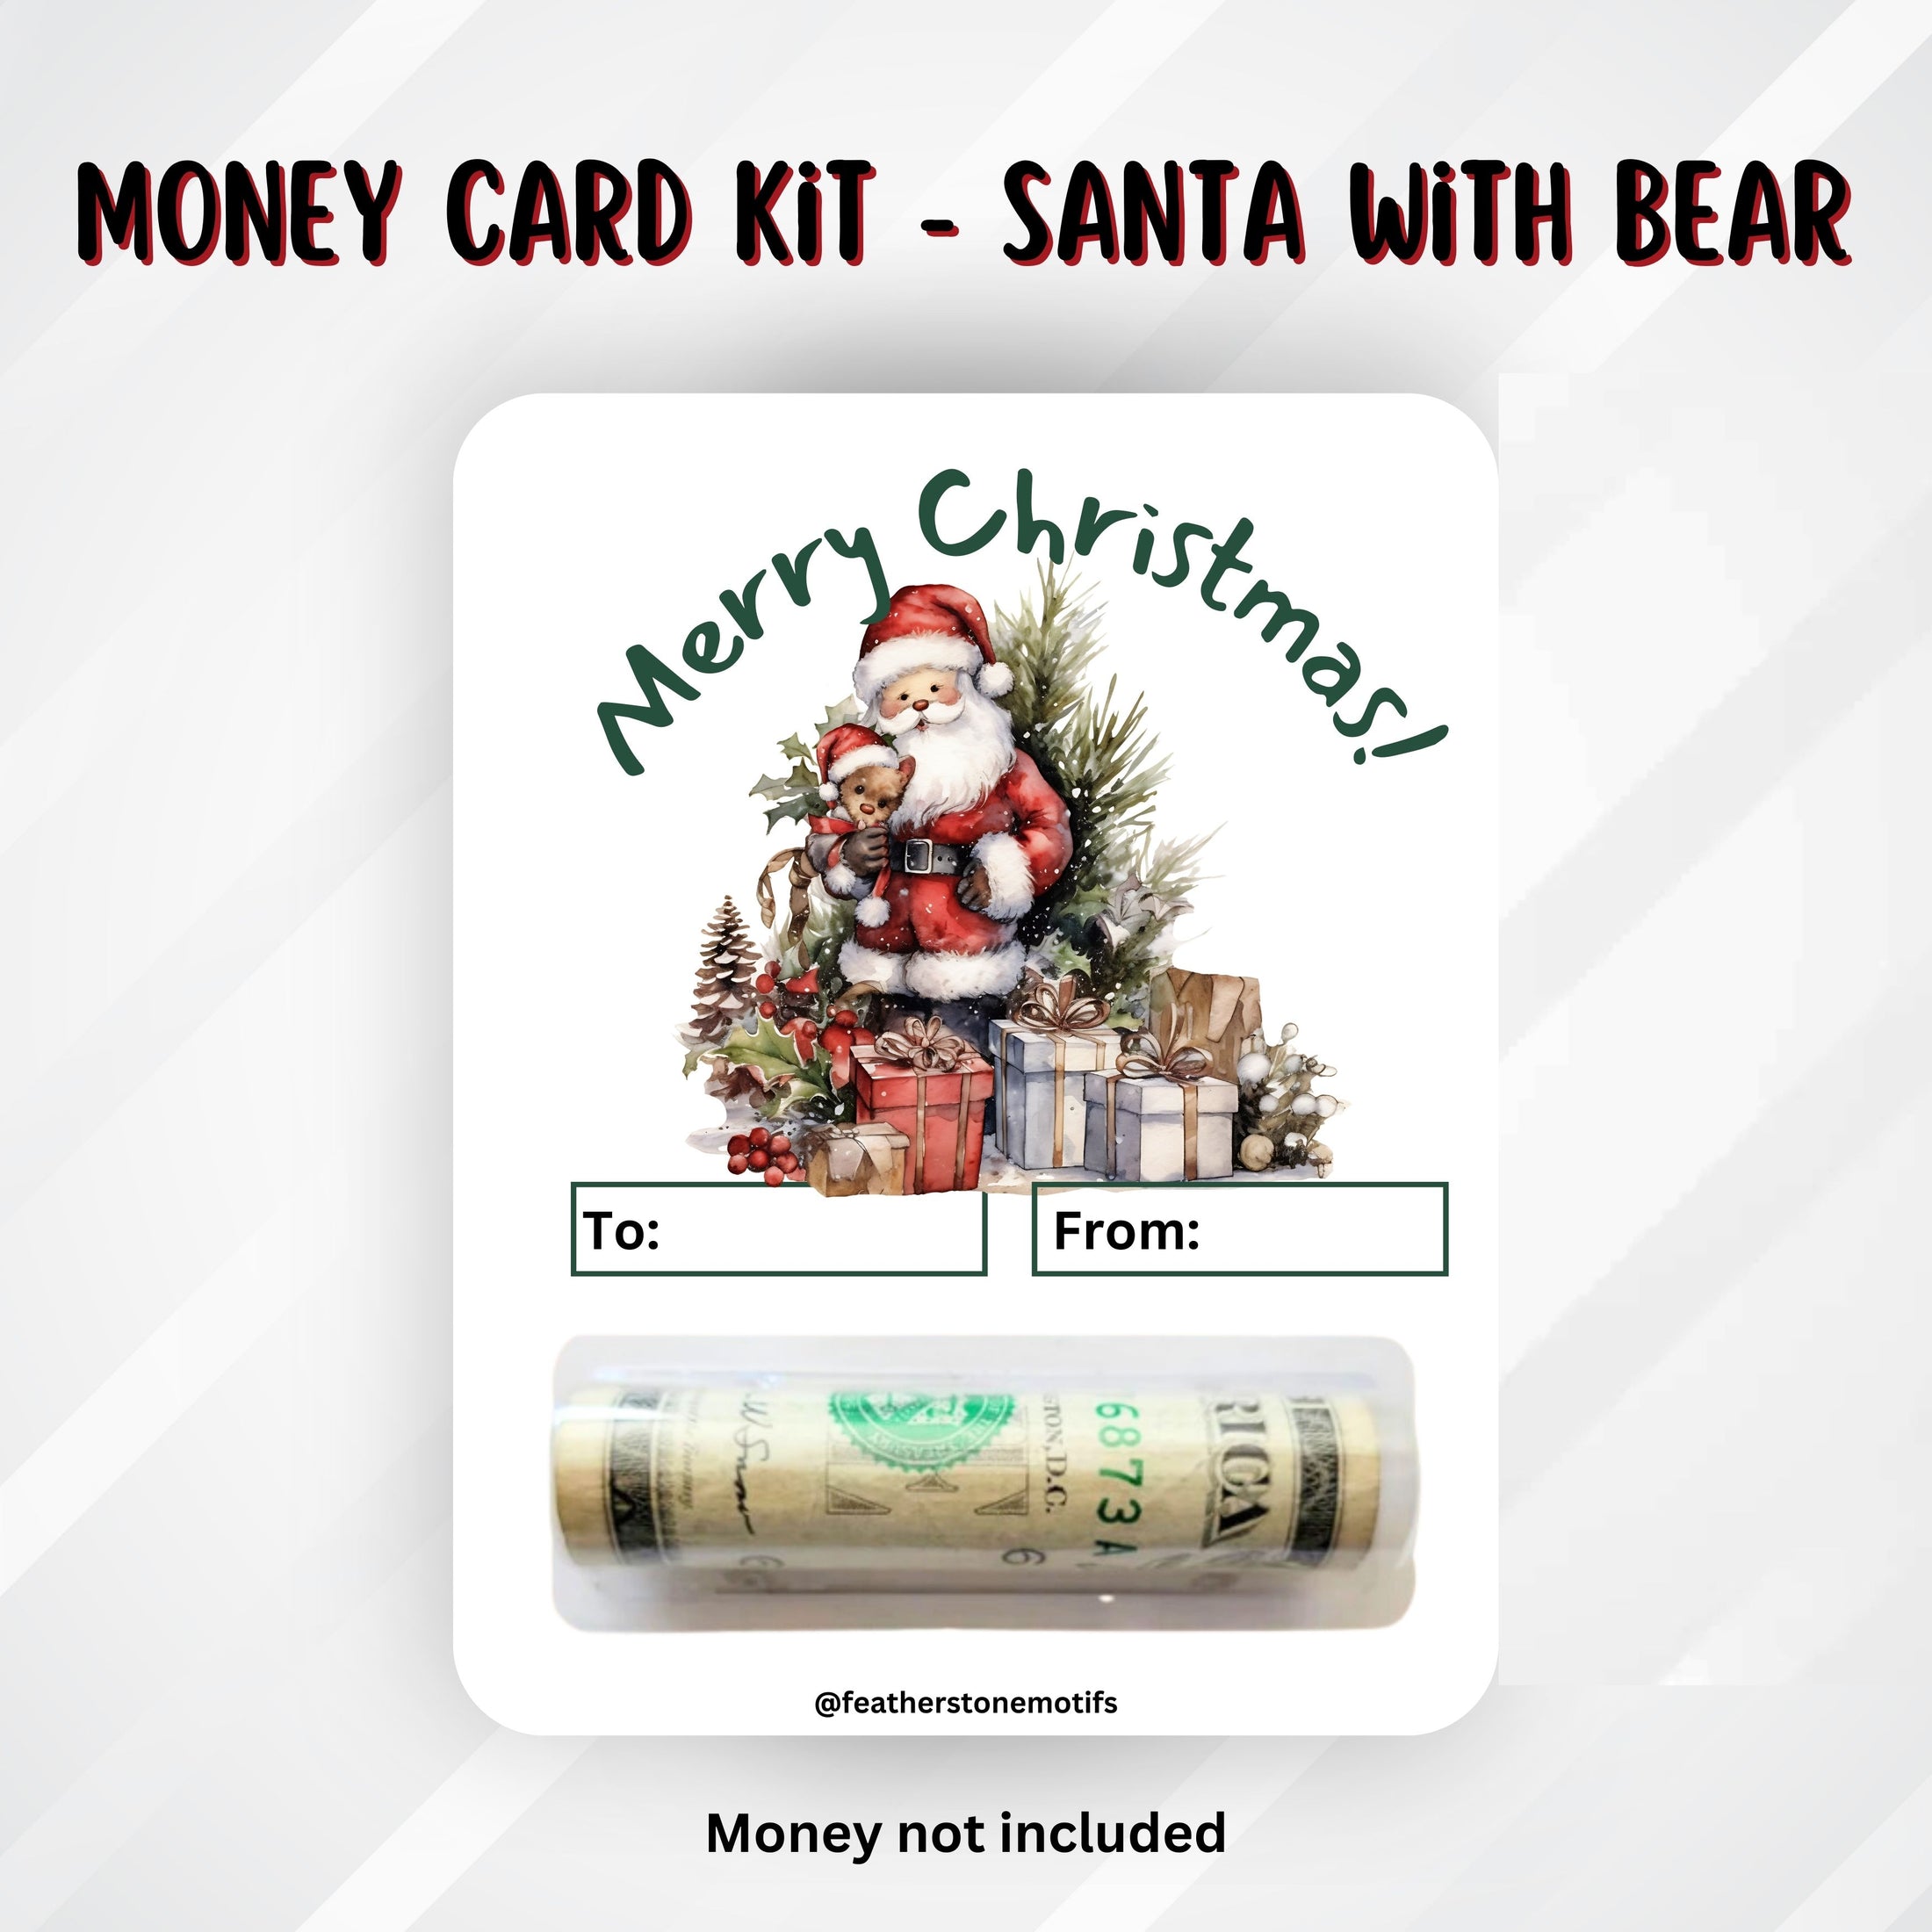 This image shows the money tube attached to the Santa with a Bear Money Card.